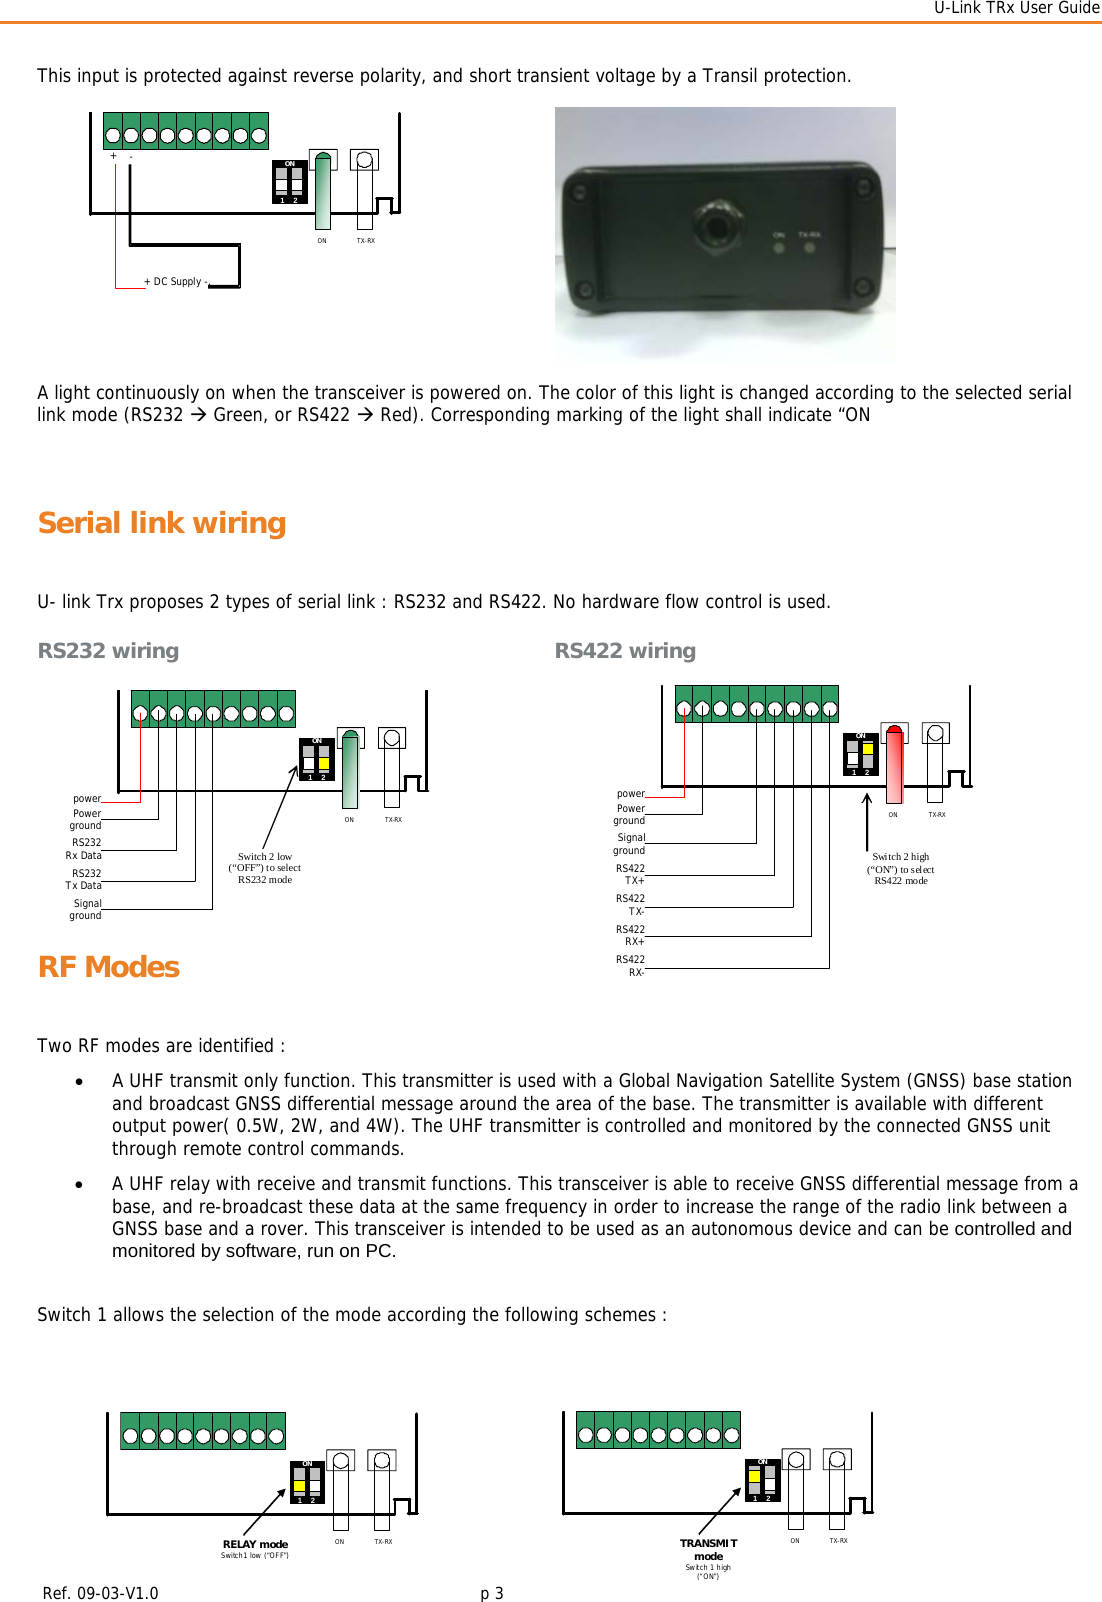  U-Link TRx User Guide    Ref. 09-03-V1.0     p 3  This input is protected against reverse polarity, and short transient voltage by a Transil protection.              A light continuously on when the transceiver is powered on. The color of this light is changed according to the selected serial link mode (RS232 Æ Green, or RS422 Æ Red). Corresponding marking of the light shall indicate “ON  Serial link wiring U- link Trx proposes 2 types of serial link : RS232 and RS422. No hardware flow control is used. RS232 wiring       RS422 wiring      RF Modes Two RF modes are identified : • A UHF transmit only function. This transmitter is used with a Global Navigation Satellite System (GNSS) base station and broadcast GNSS differential message around the area of the base. The transmitter is available with different output power( 0.5W, 2W, and 4W). The UHF transmitter is controlled and monitored by the connected GNSS unit through remote control commands. • A UHF relay with receive and transmit functions. This transceiver is able to receive GNSS differential message from a base, and re-broadcast these data at the same frequency in order to increase the range of the radio link between a GNSS base and a rover. This transceiver is intended to be used as an autonomous device and can be controlled and monitored by software, run on PC.  Switch 1 allows the selection of the mode according the following schemes :           + DC Supply -. + - ON ON1    2 TX-RX powerPowerground ON TX-RX RS232Rx DataRS232Tx DataSignalgroundON 1    2 Switch 2 low (“OFF”) to select RS232 modepowerPowerground ON TX-RXRS422 TX+SignalgroundON 1    2 Switch 2 high (“ON”) to select  RS422 mode RS422 TX-RS422 RX+RS422RX- ON ON 1    2 TX-RXRELAY modeSwitch1 low (“OFF”)ON TX-RXTRANSMIT mode Switch 1 high (“ON”) ON1    2 